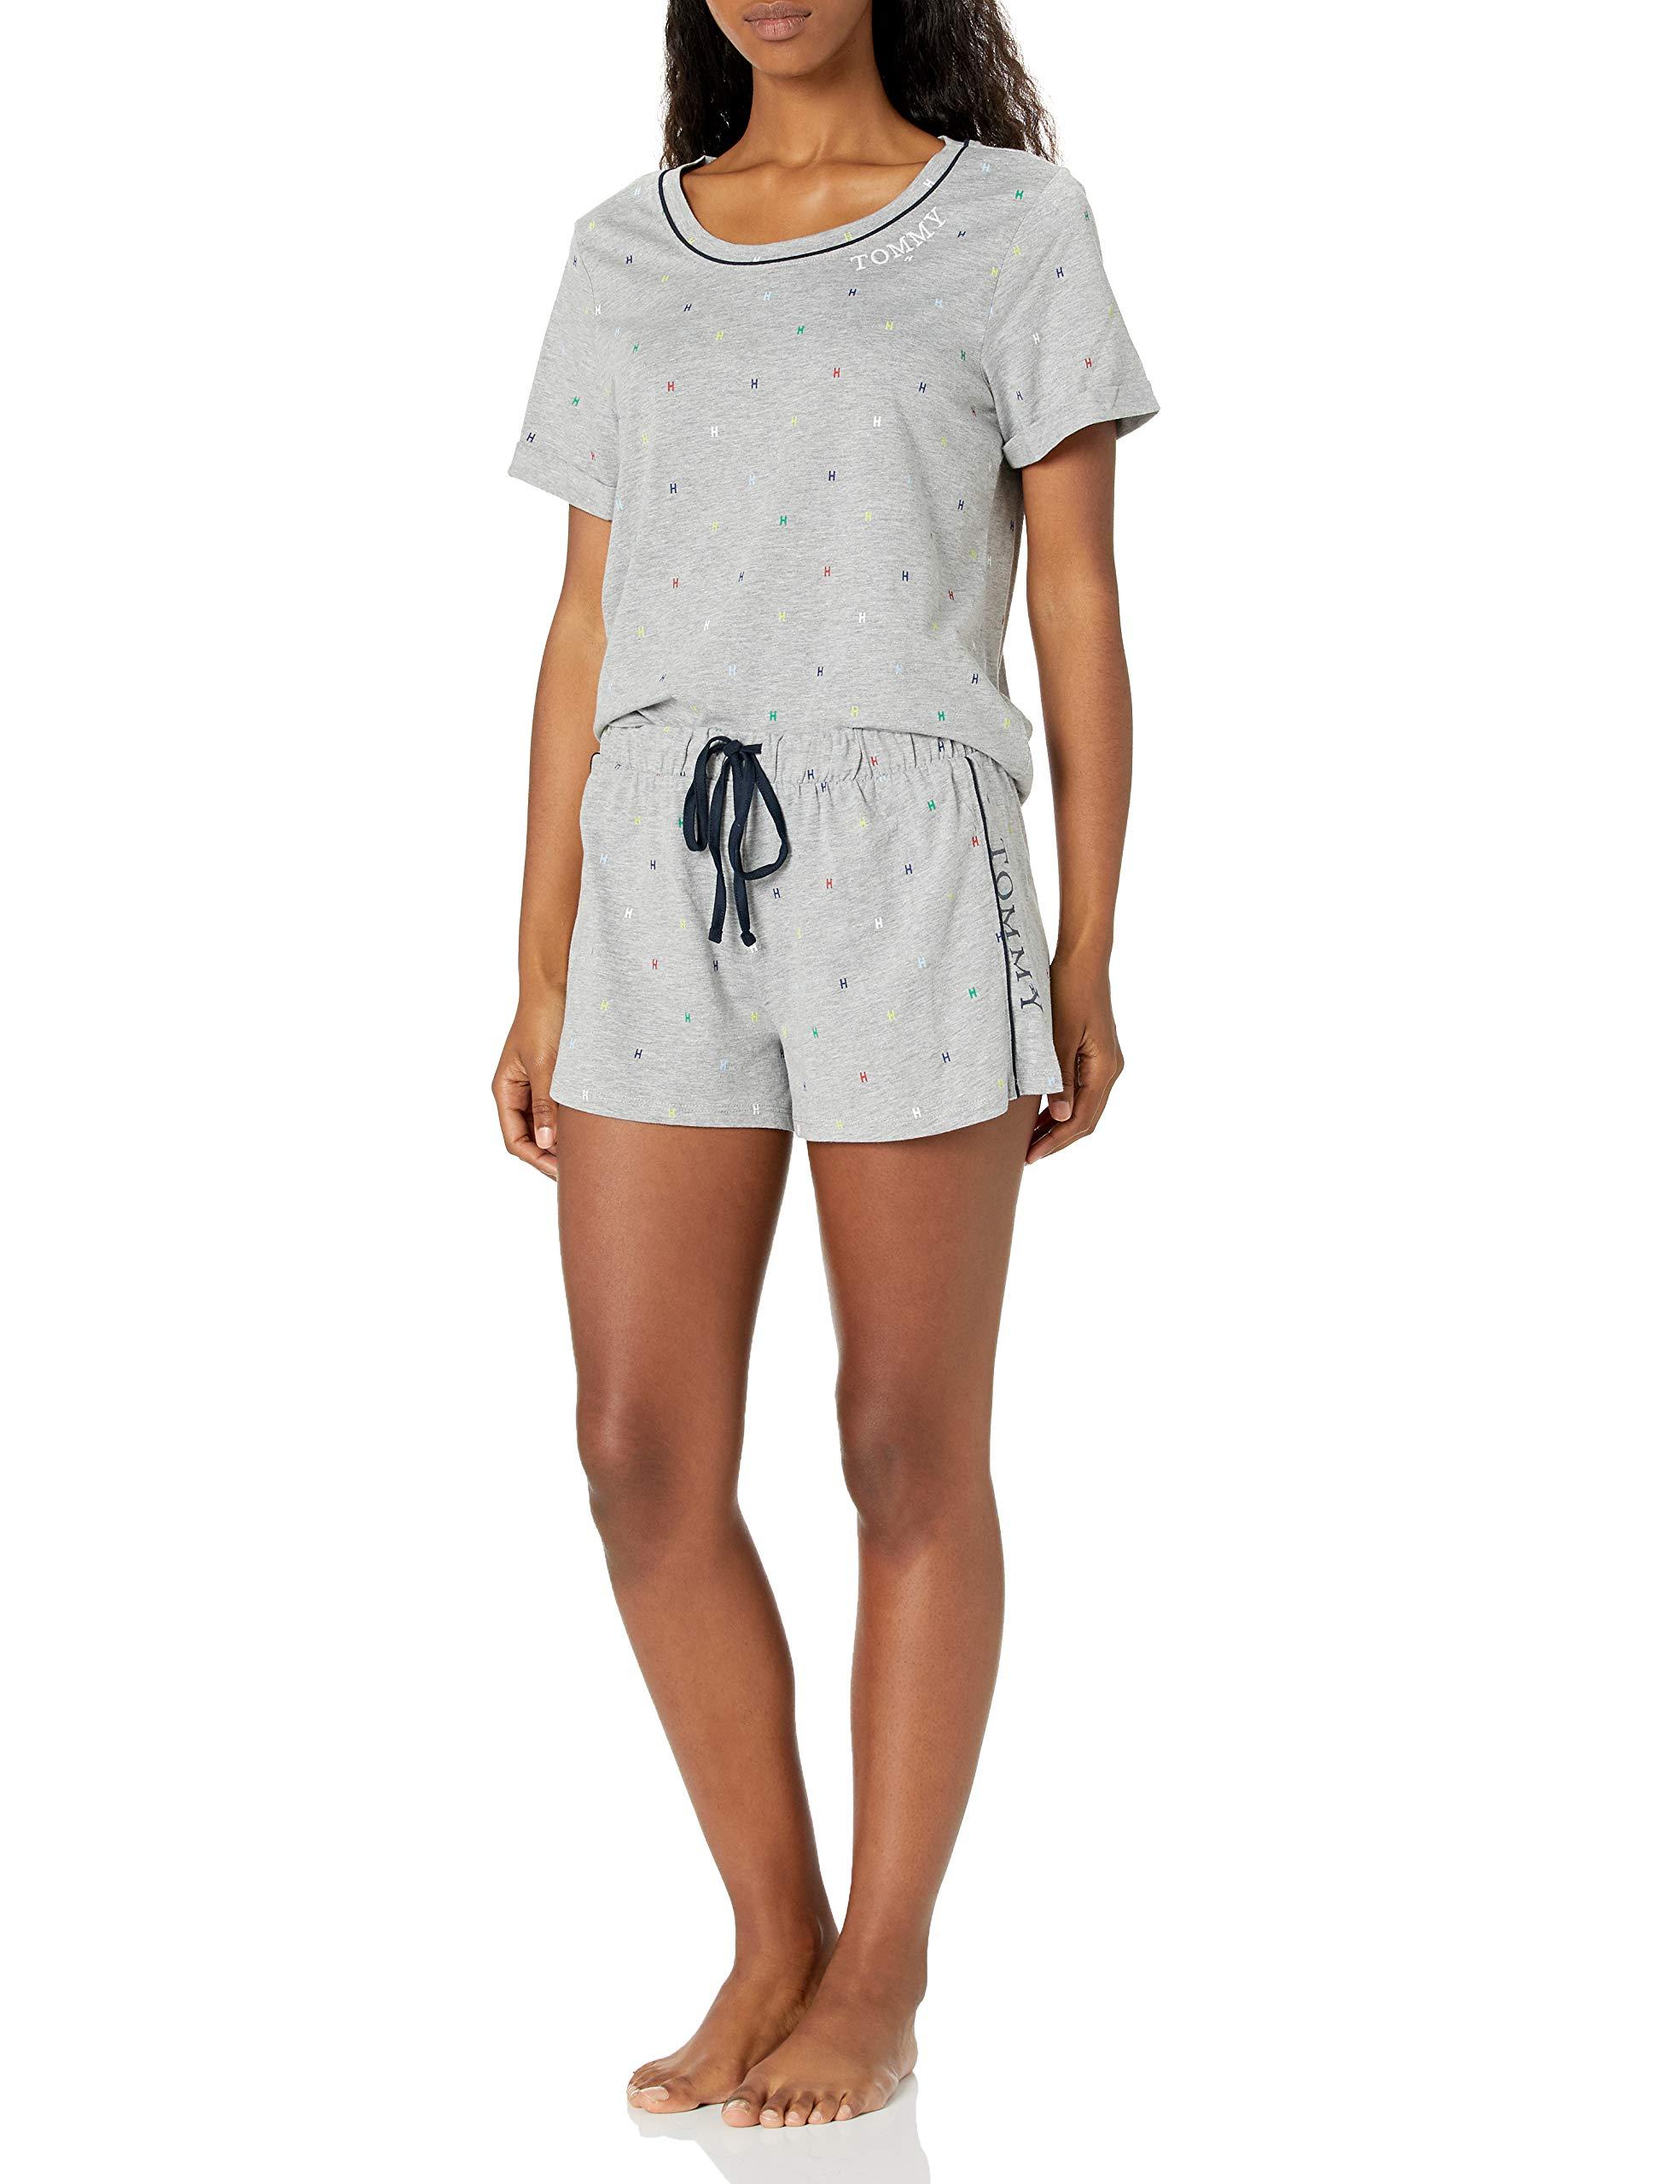 Tommy Hilfiger Cotton Top And Short Bottom Pajama Pj Set in Gray - Lyst